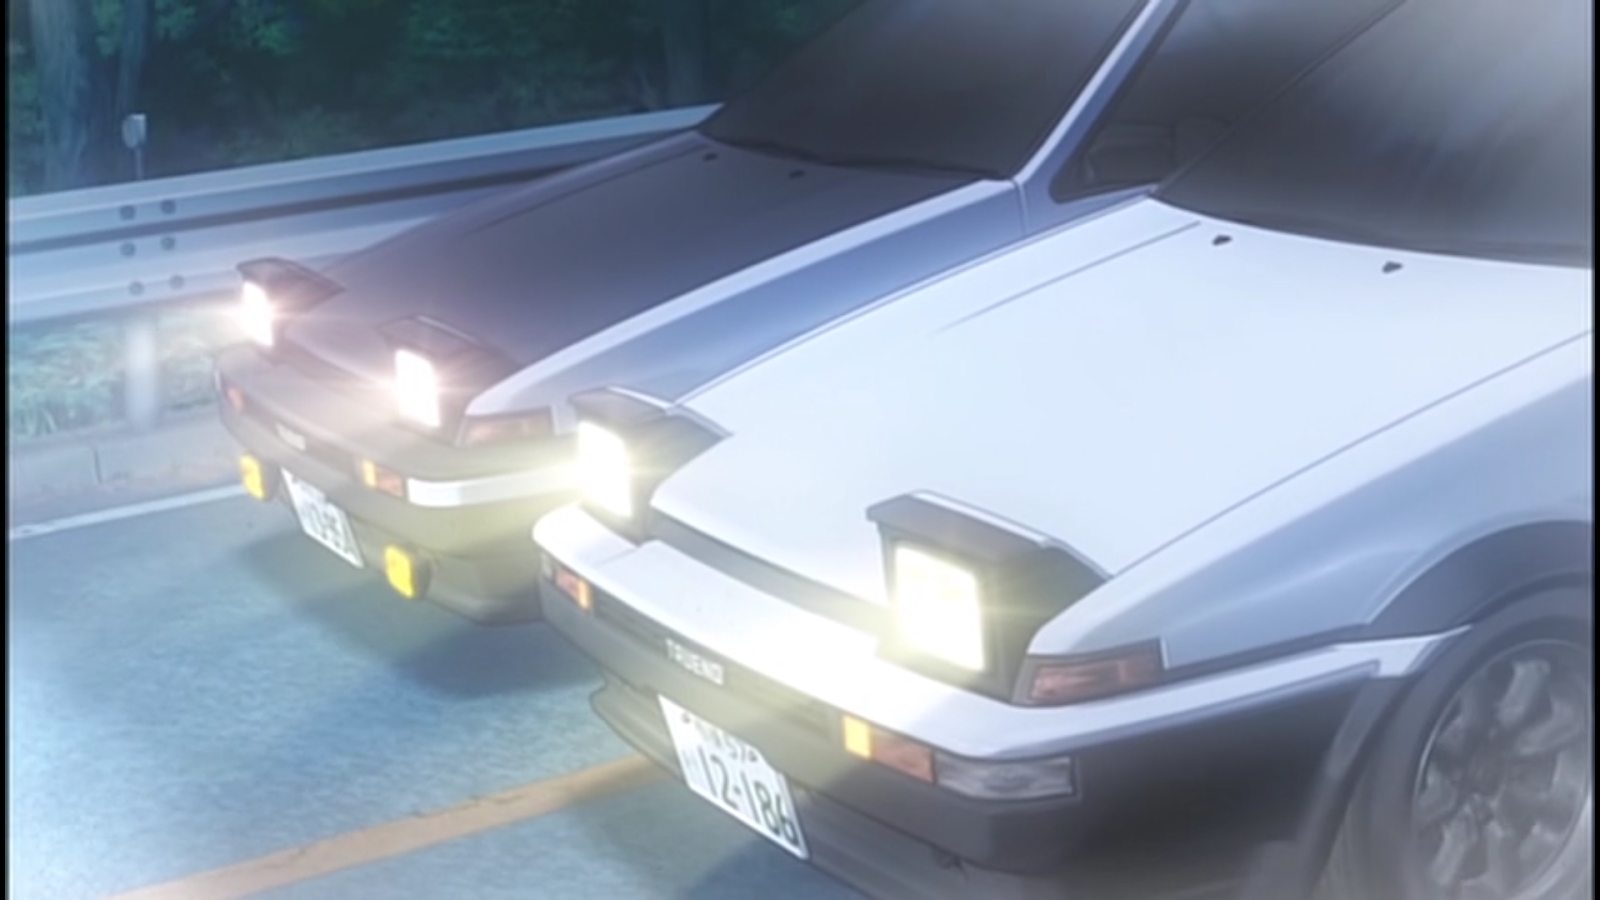 East-West Brothers Garage: Review: Initial D Final Stage